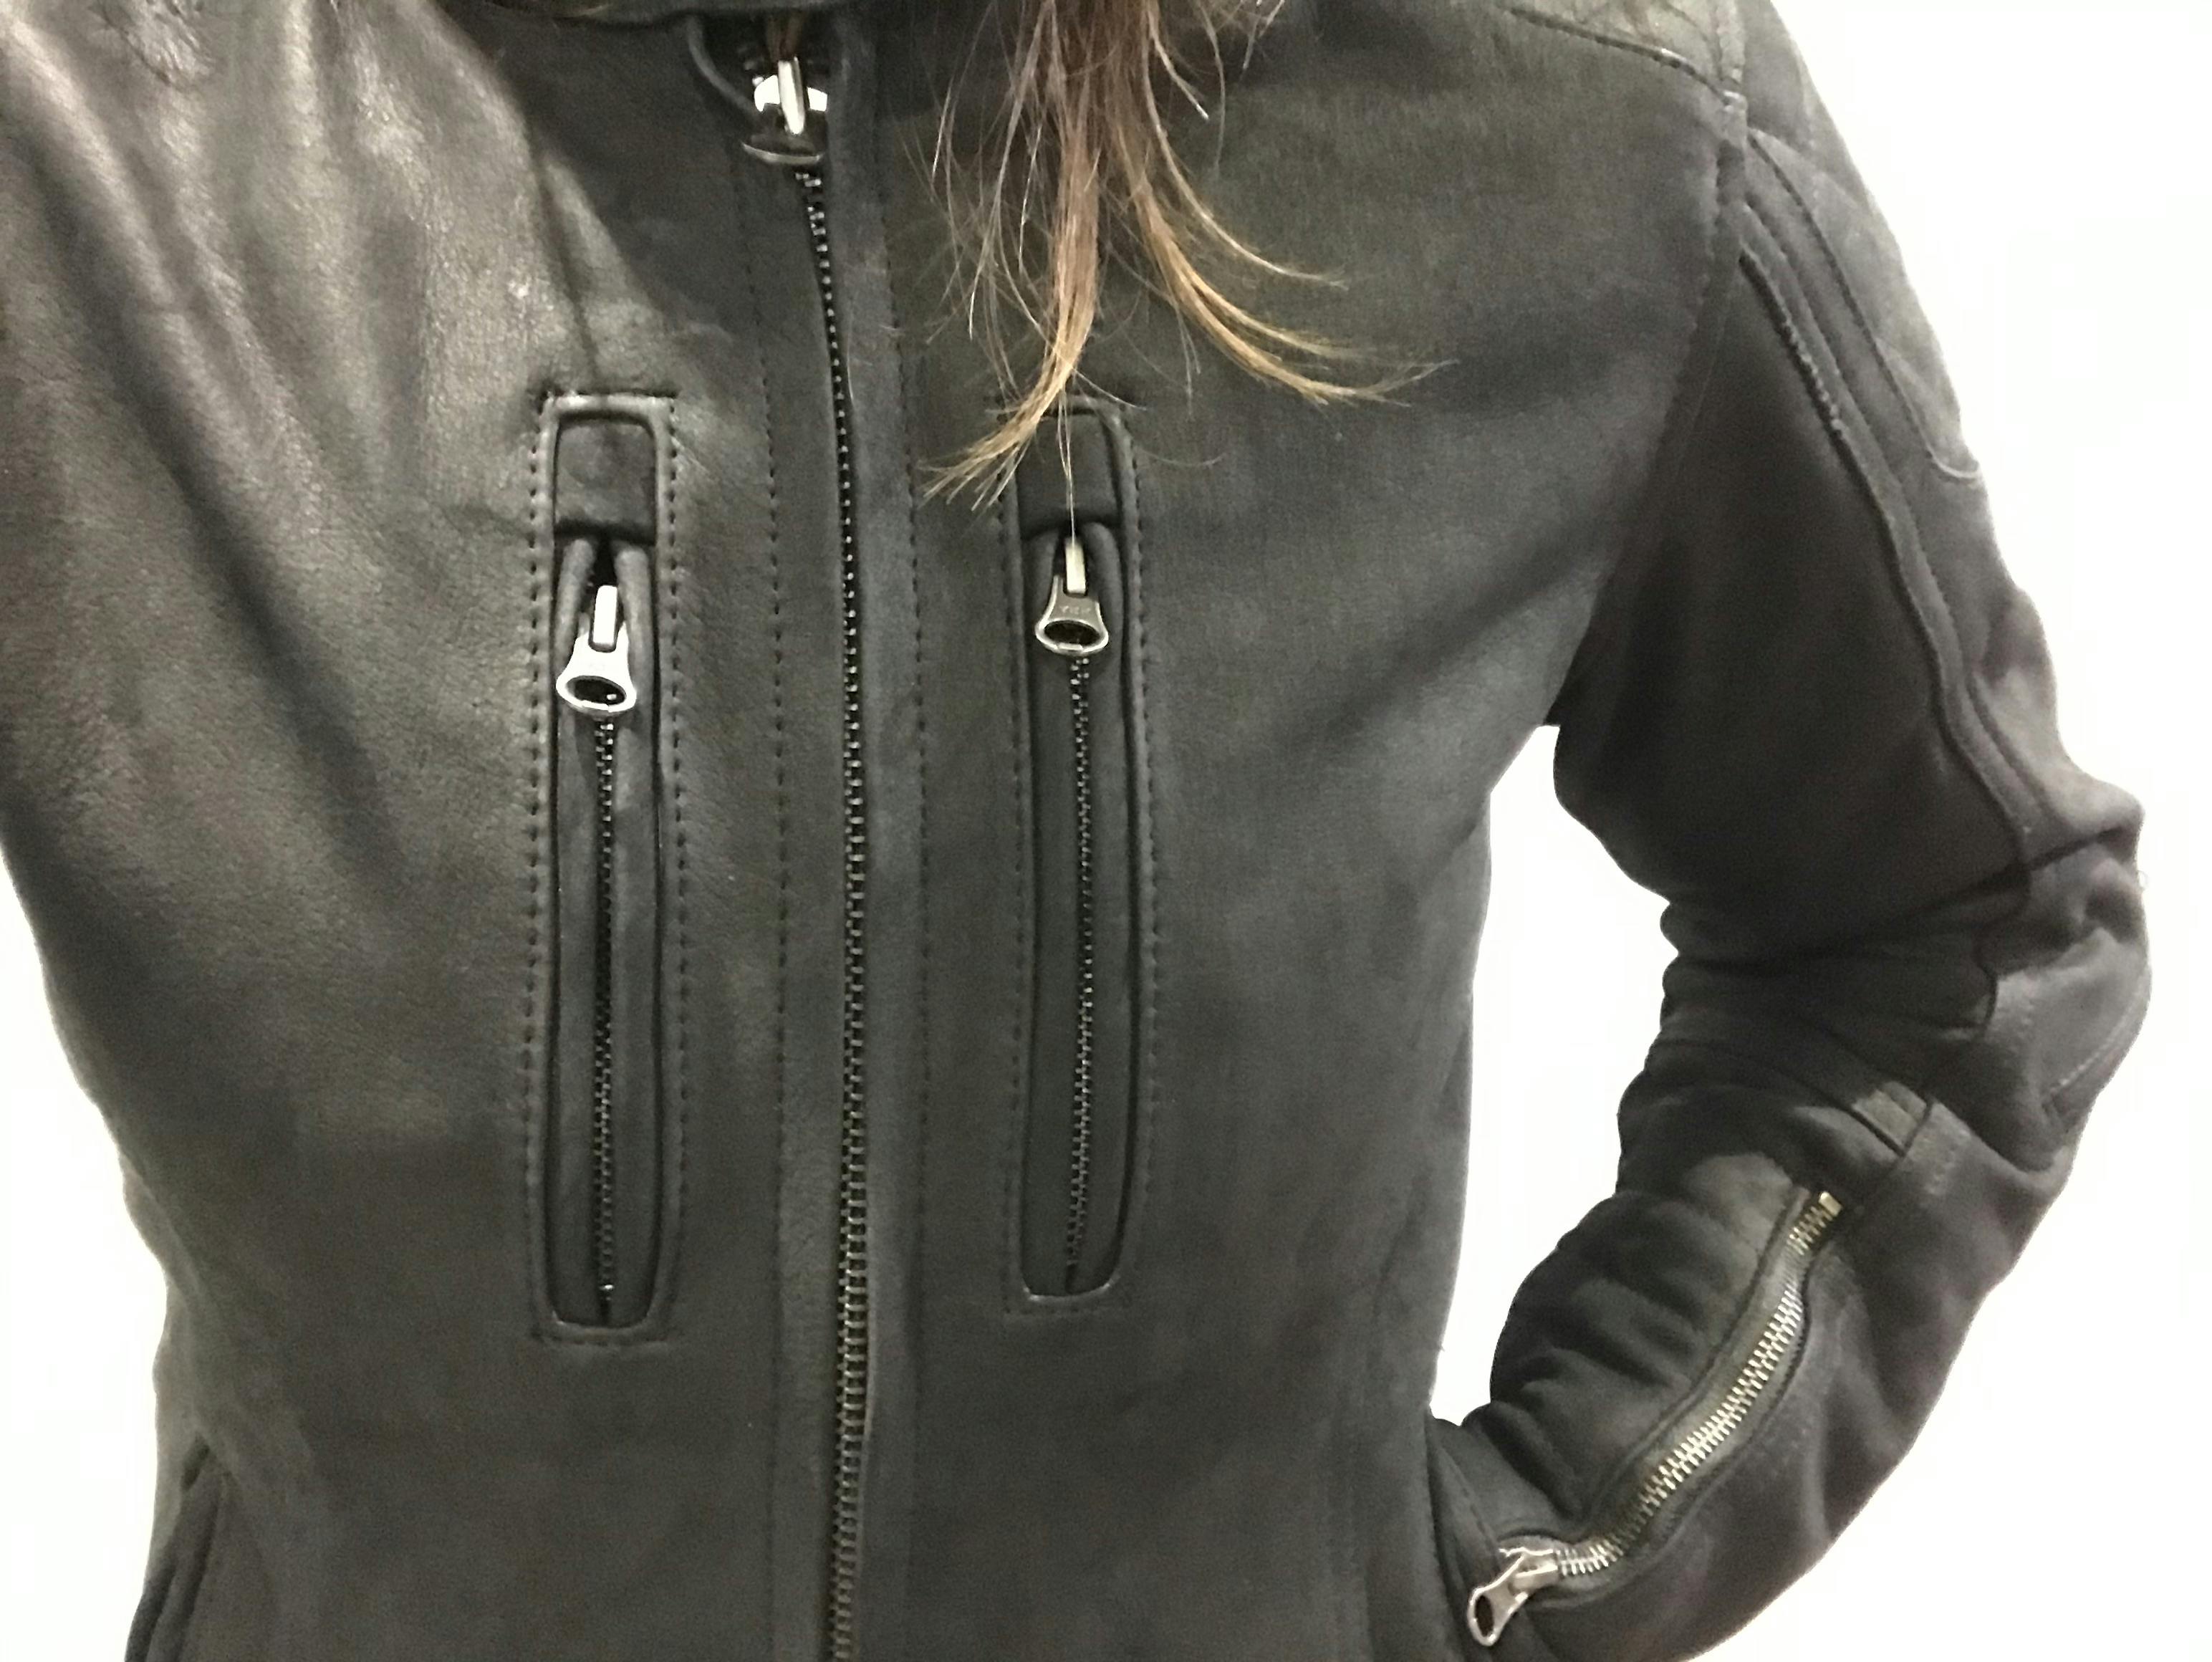 The front chest pockets non the Merlin Mia jacket